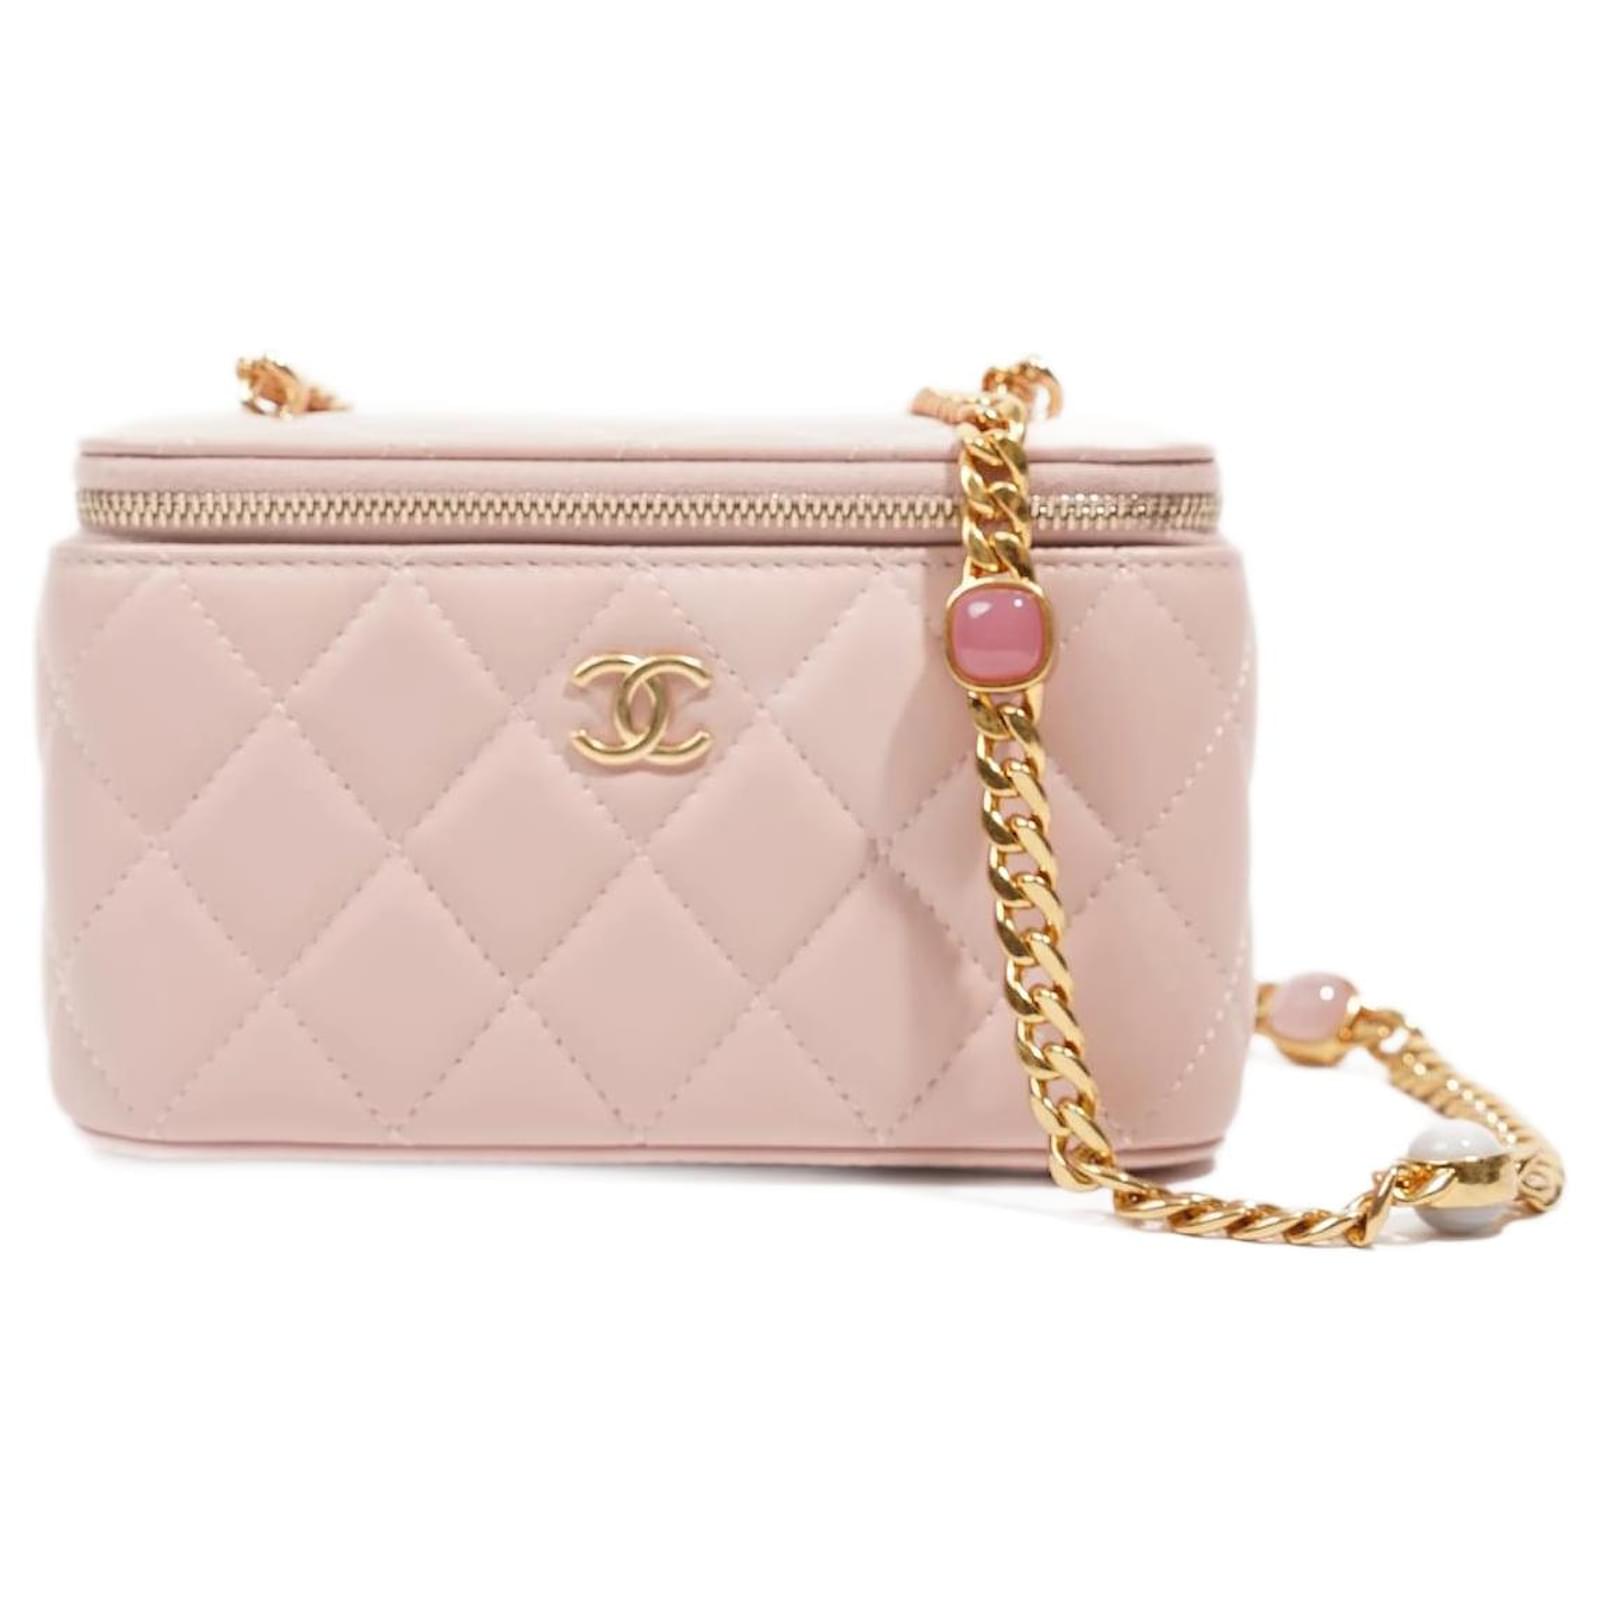 Chanel Light Pink Mini Vanity Case with Chain Bag